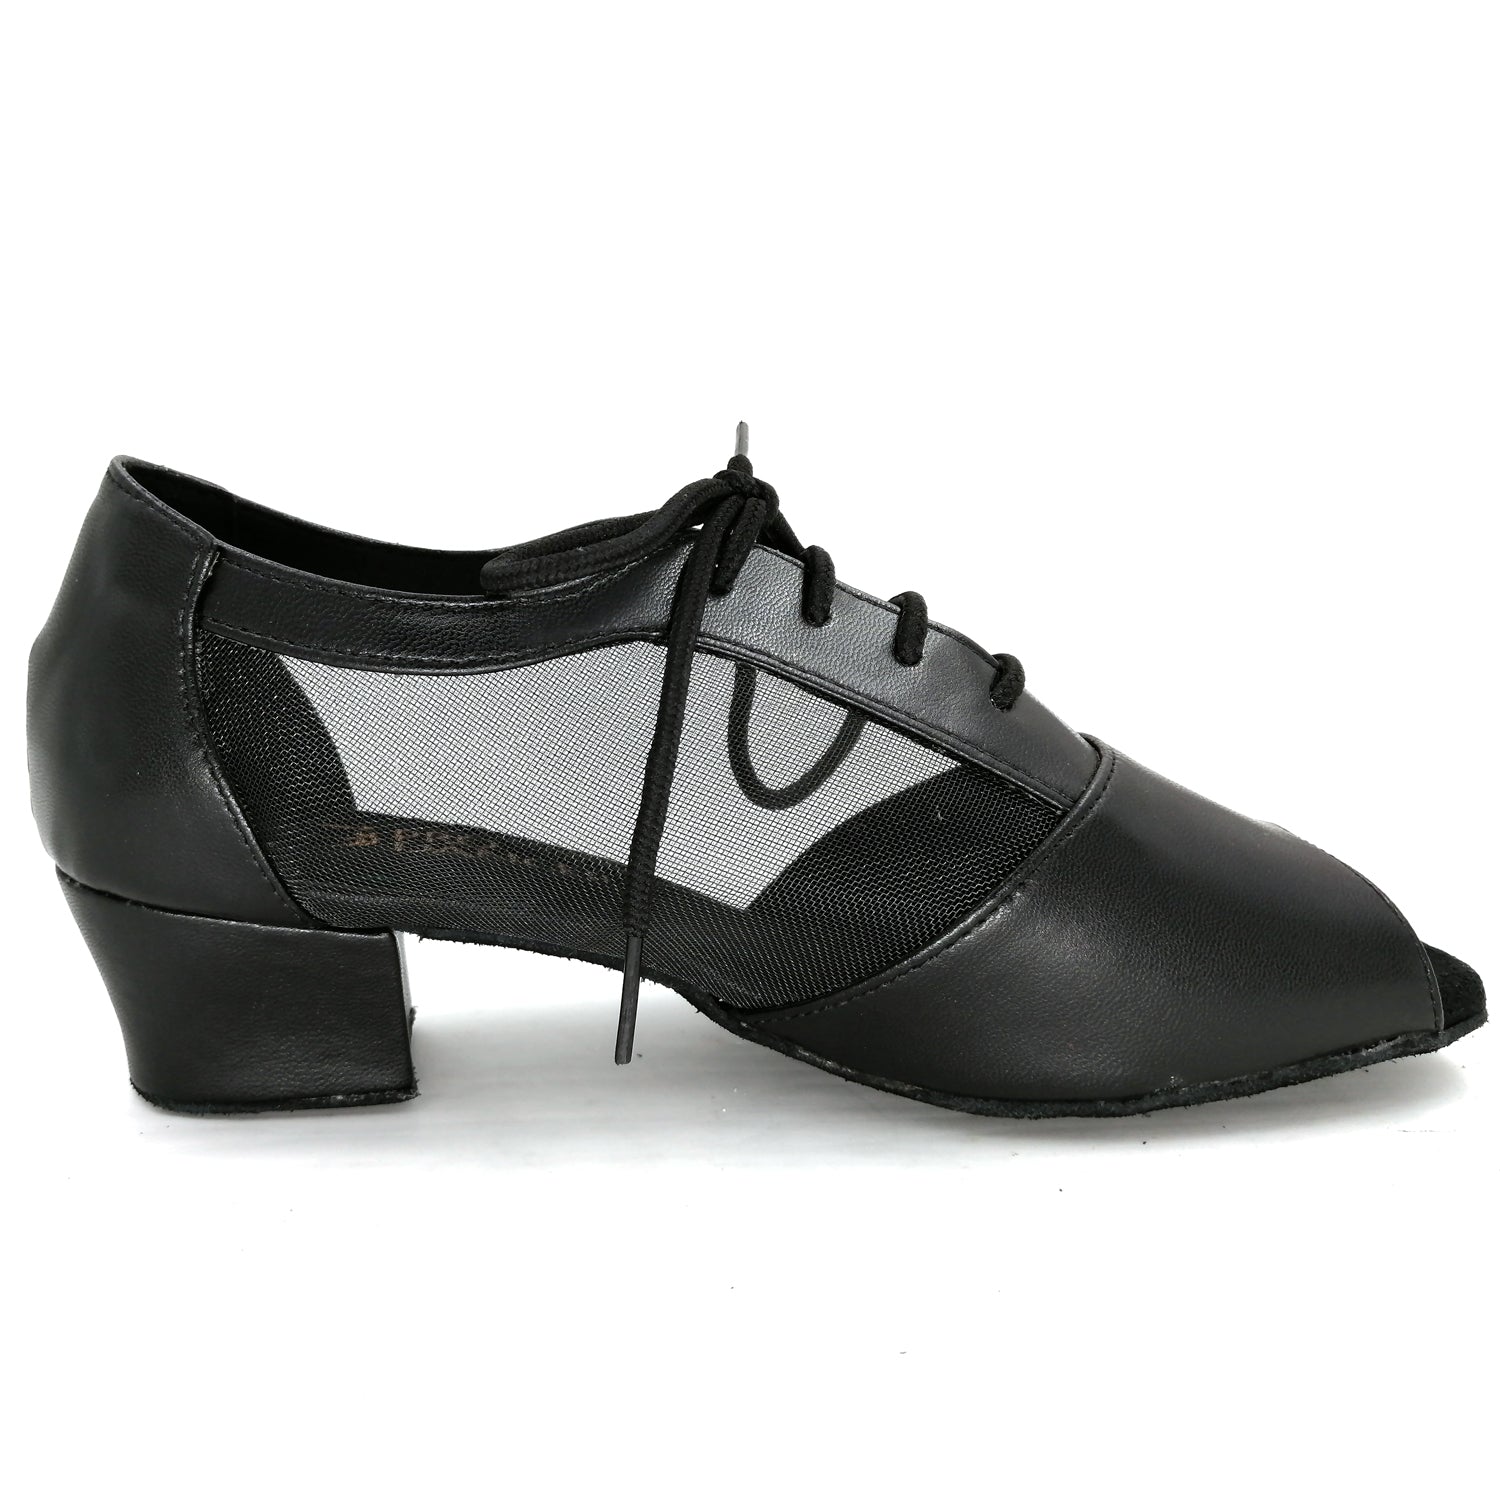 Women Ballroom Dancing Shoes with Suede Sole, Lace-up Peep-toe Design in Black for Tango Latin Practice (PD1141D)5